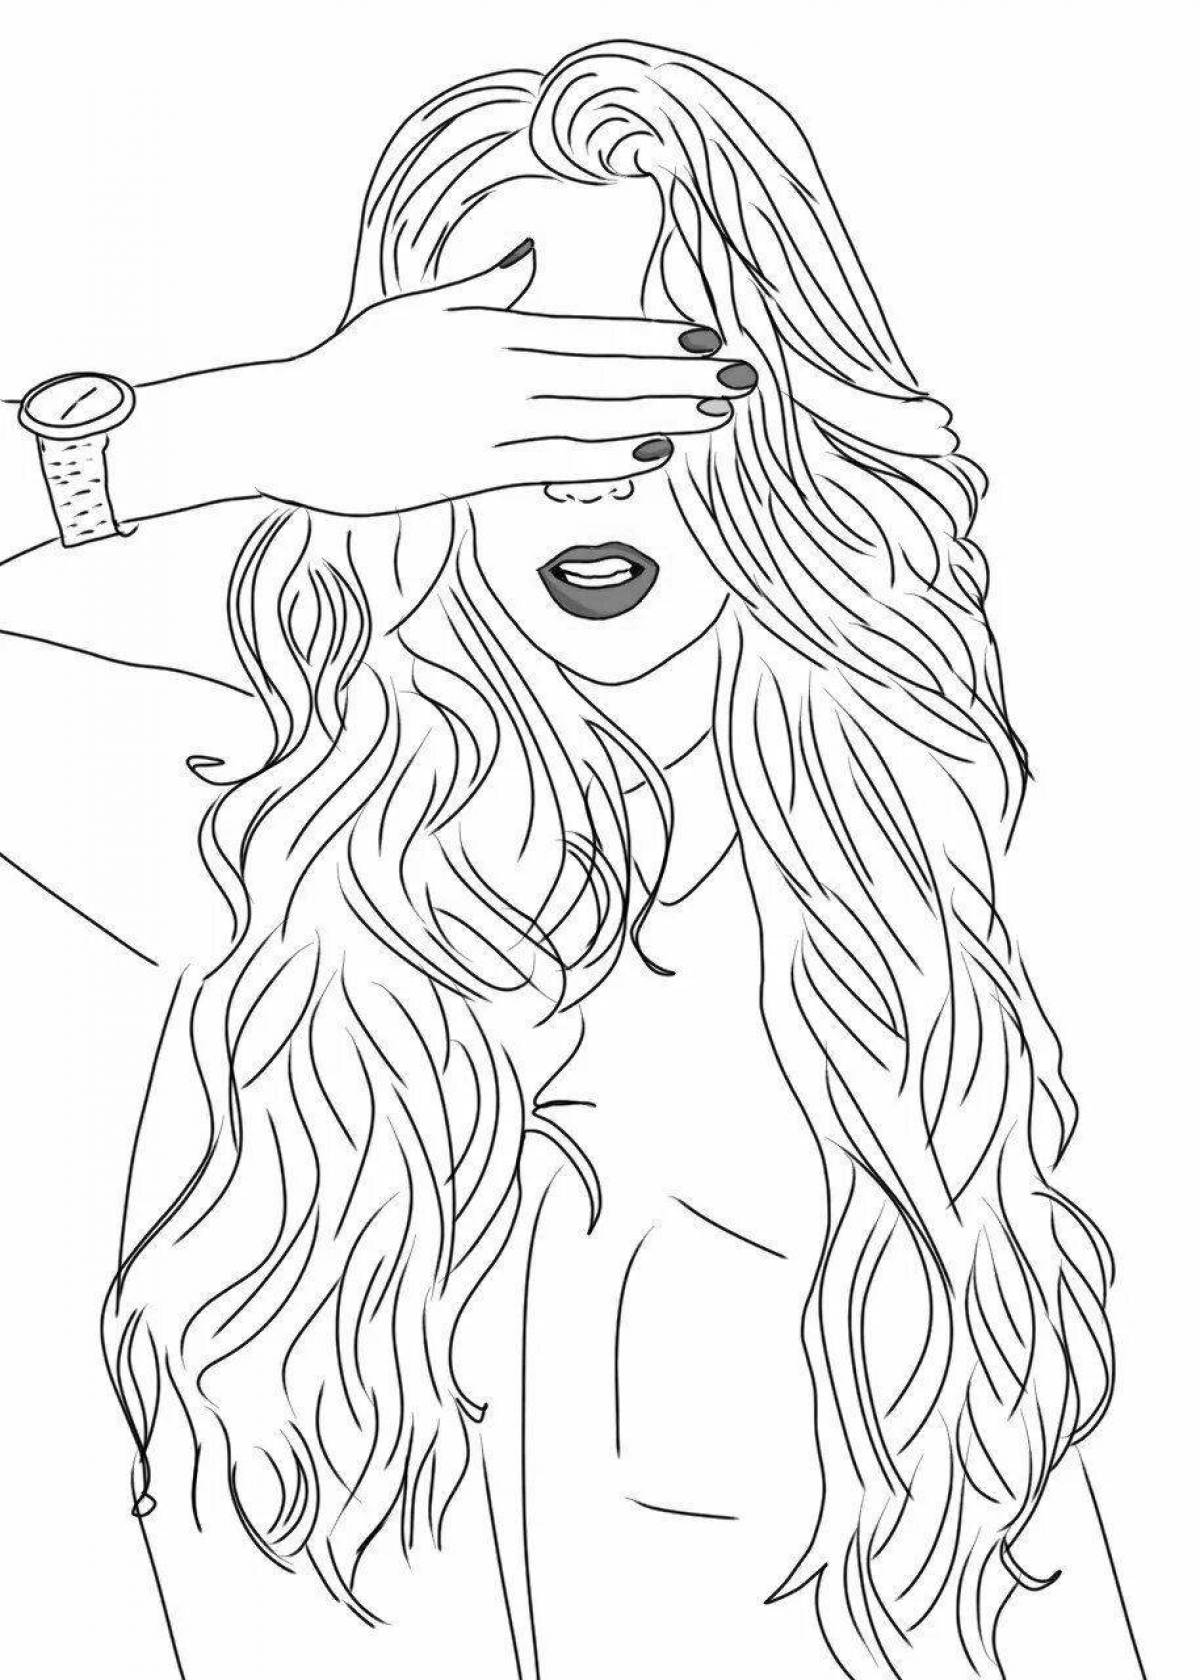 Bright girl hair coloring page